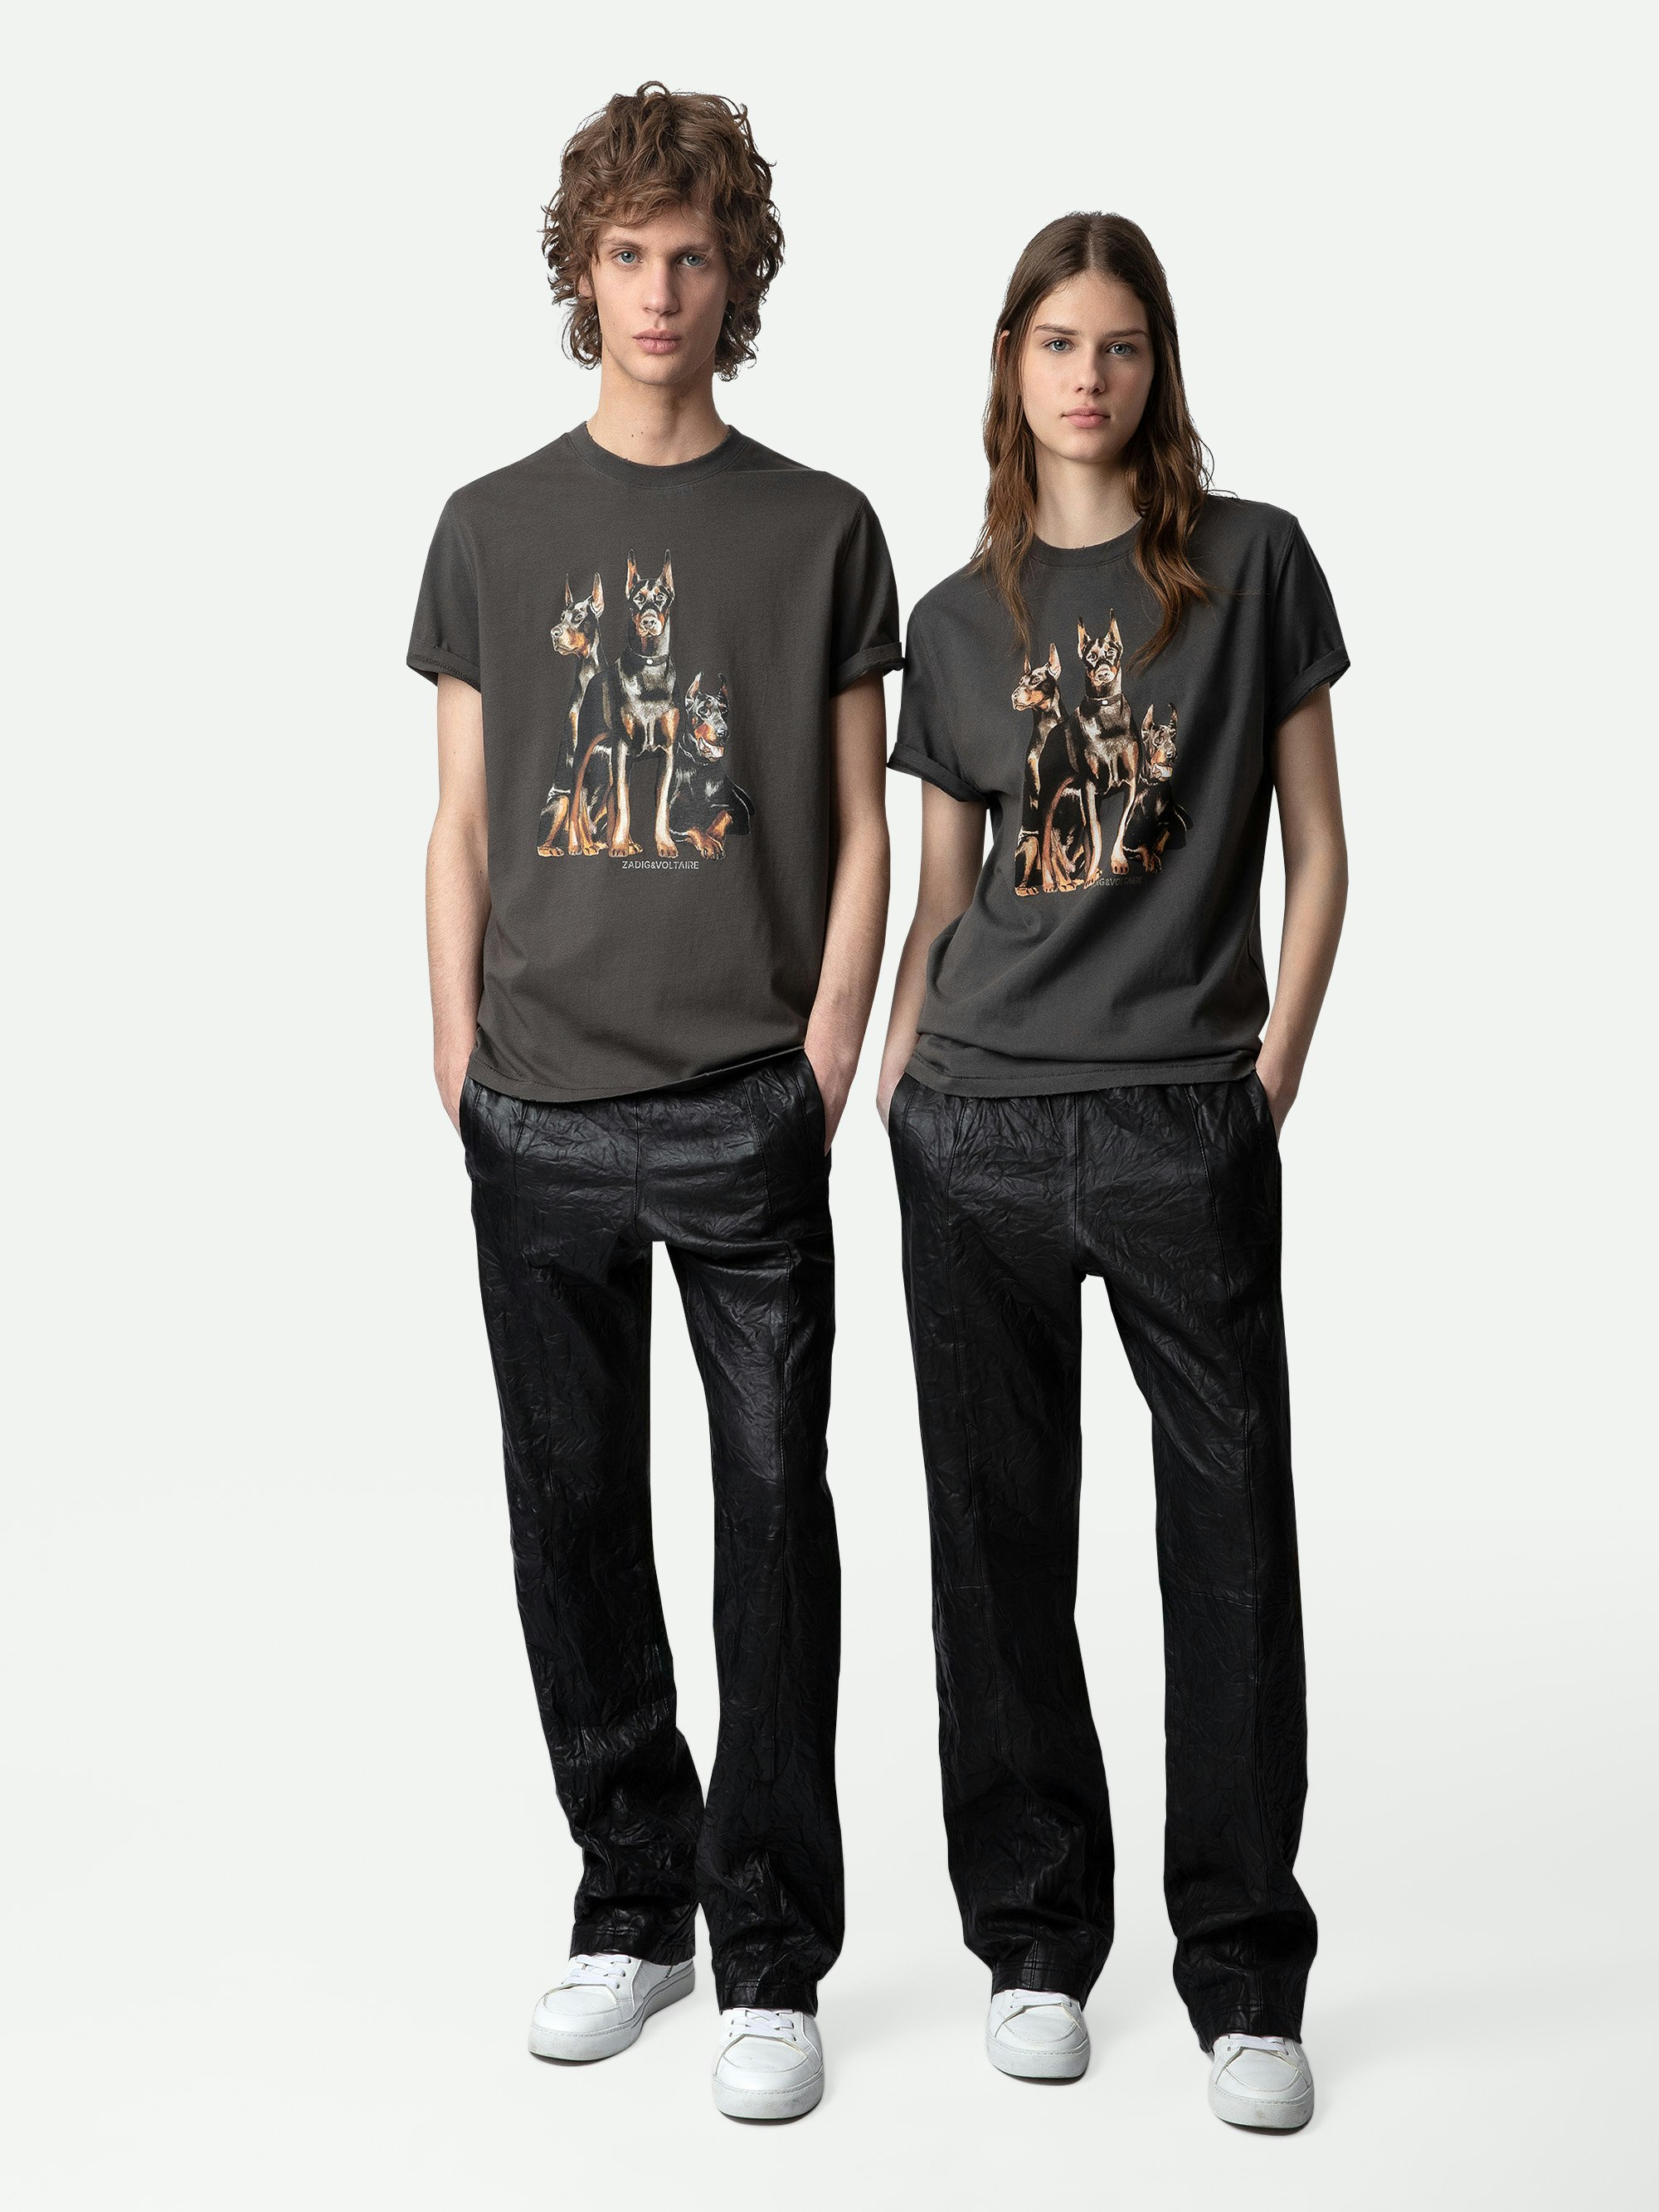 Jimmy T-shirt - Brown cotton short-sleeved T-shirt with Doberman and Concert prints.